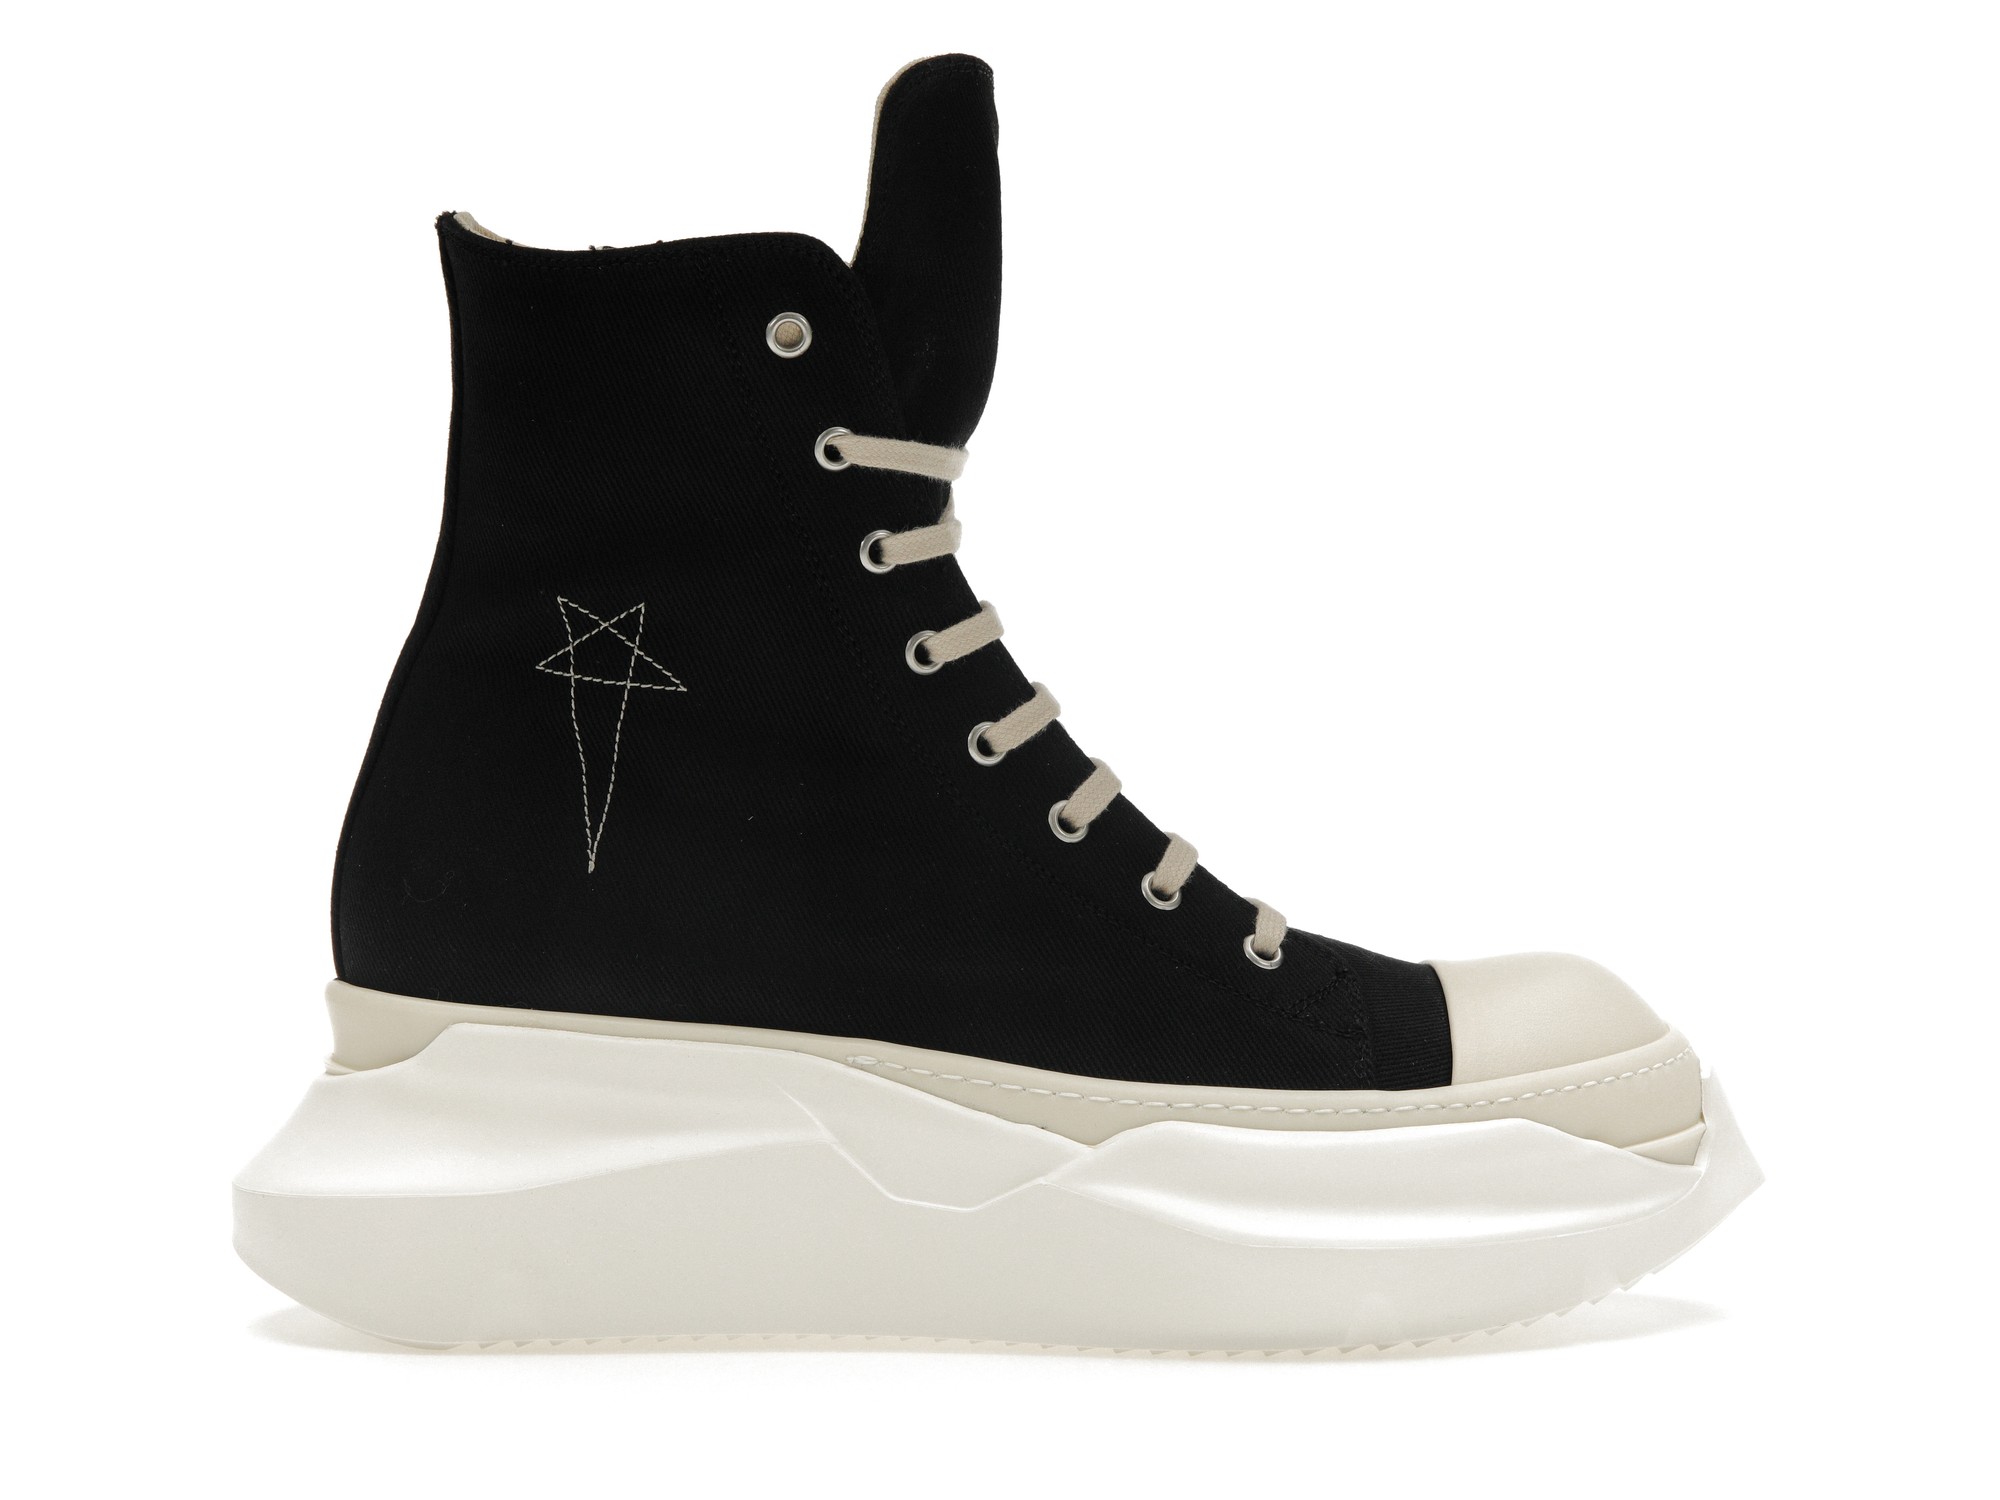 Rick Owens DRKSHDW Abstract High Top Embroidered Pentagram Black